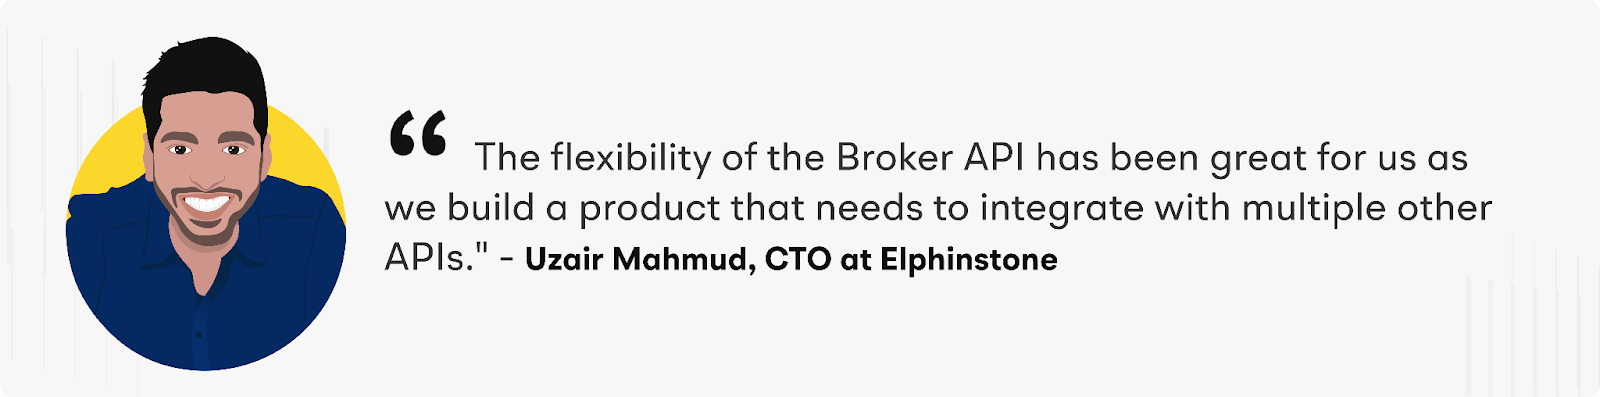 Elphinstone: Transforming Pakistani Investing with USD Accessibility